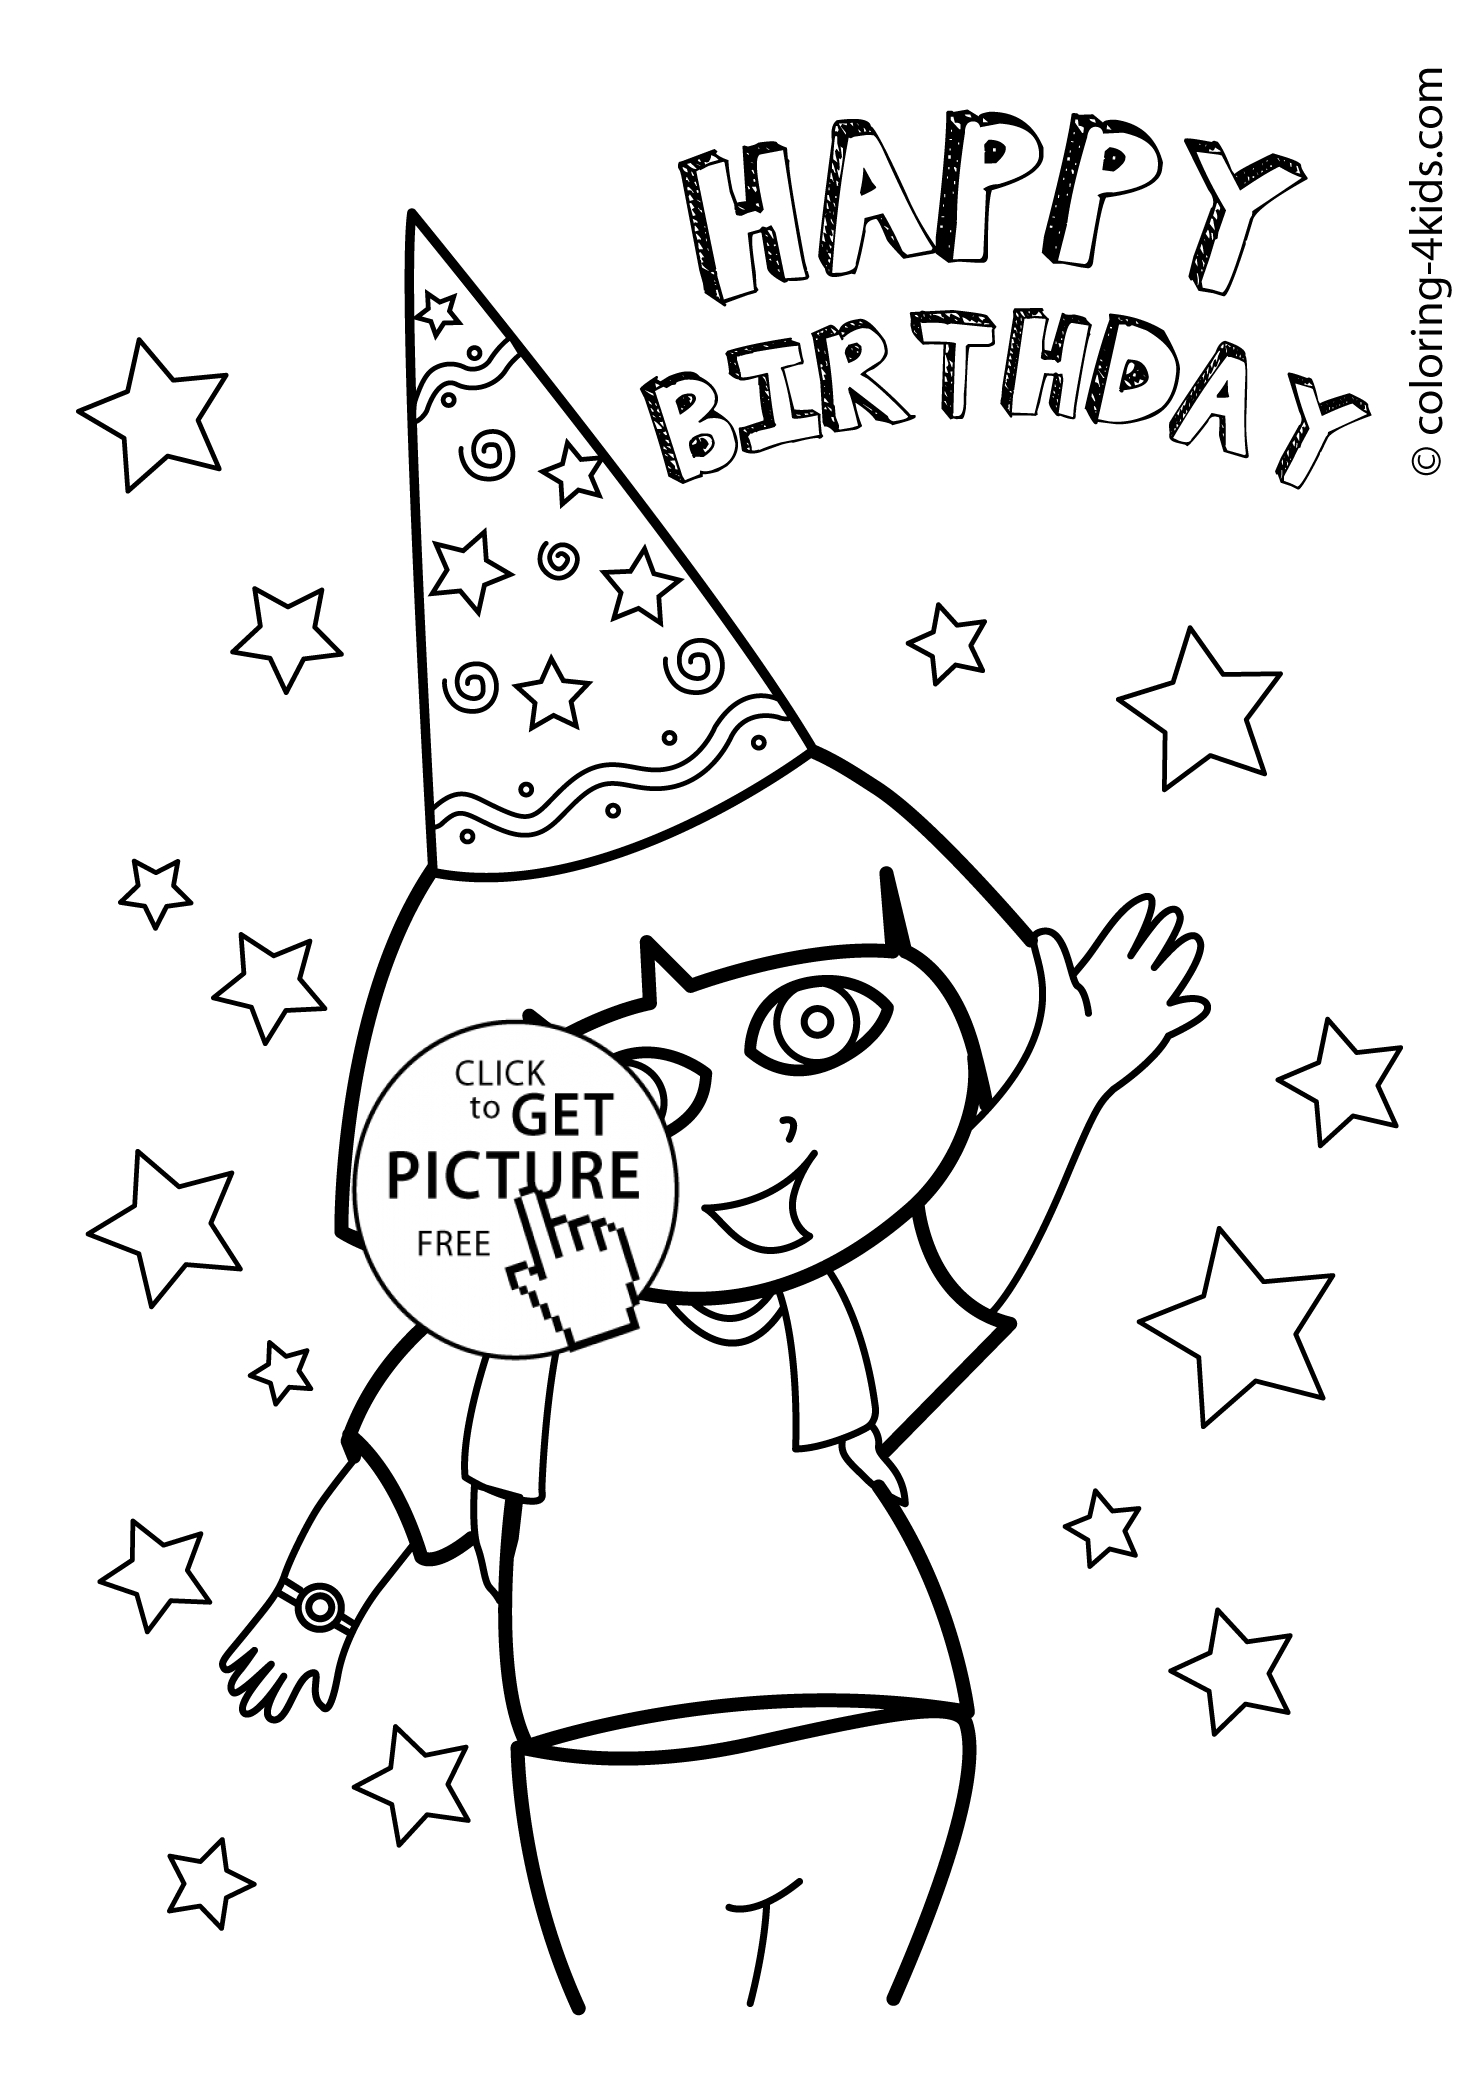 Happy Birthday Coloring Pages For Friends Dora Happy Birthday Coloring Pages For Kids Printables